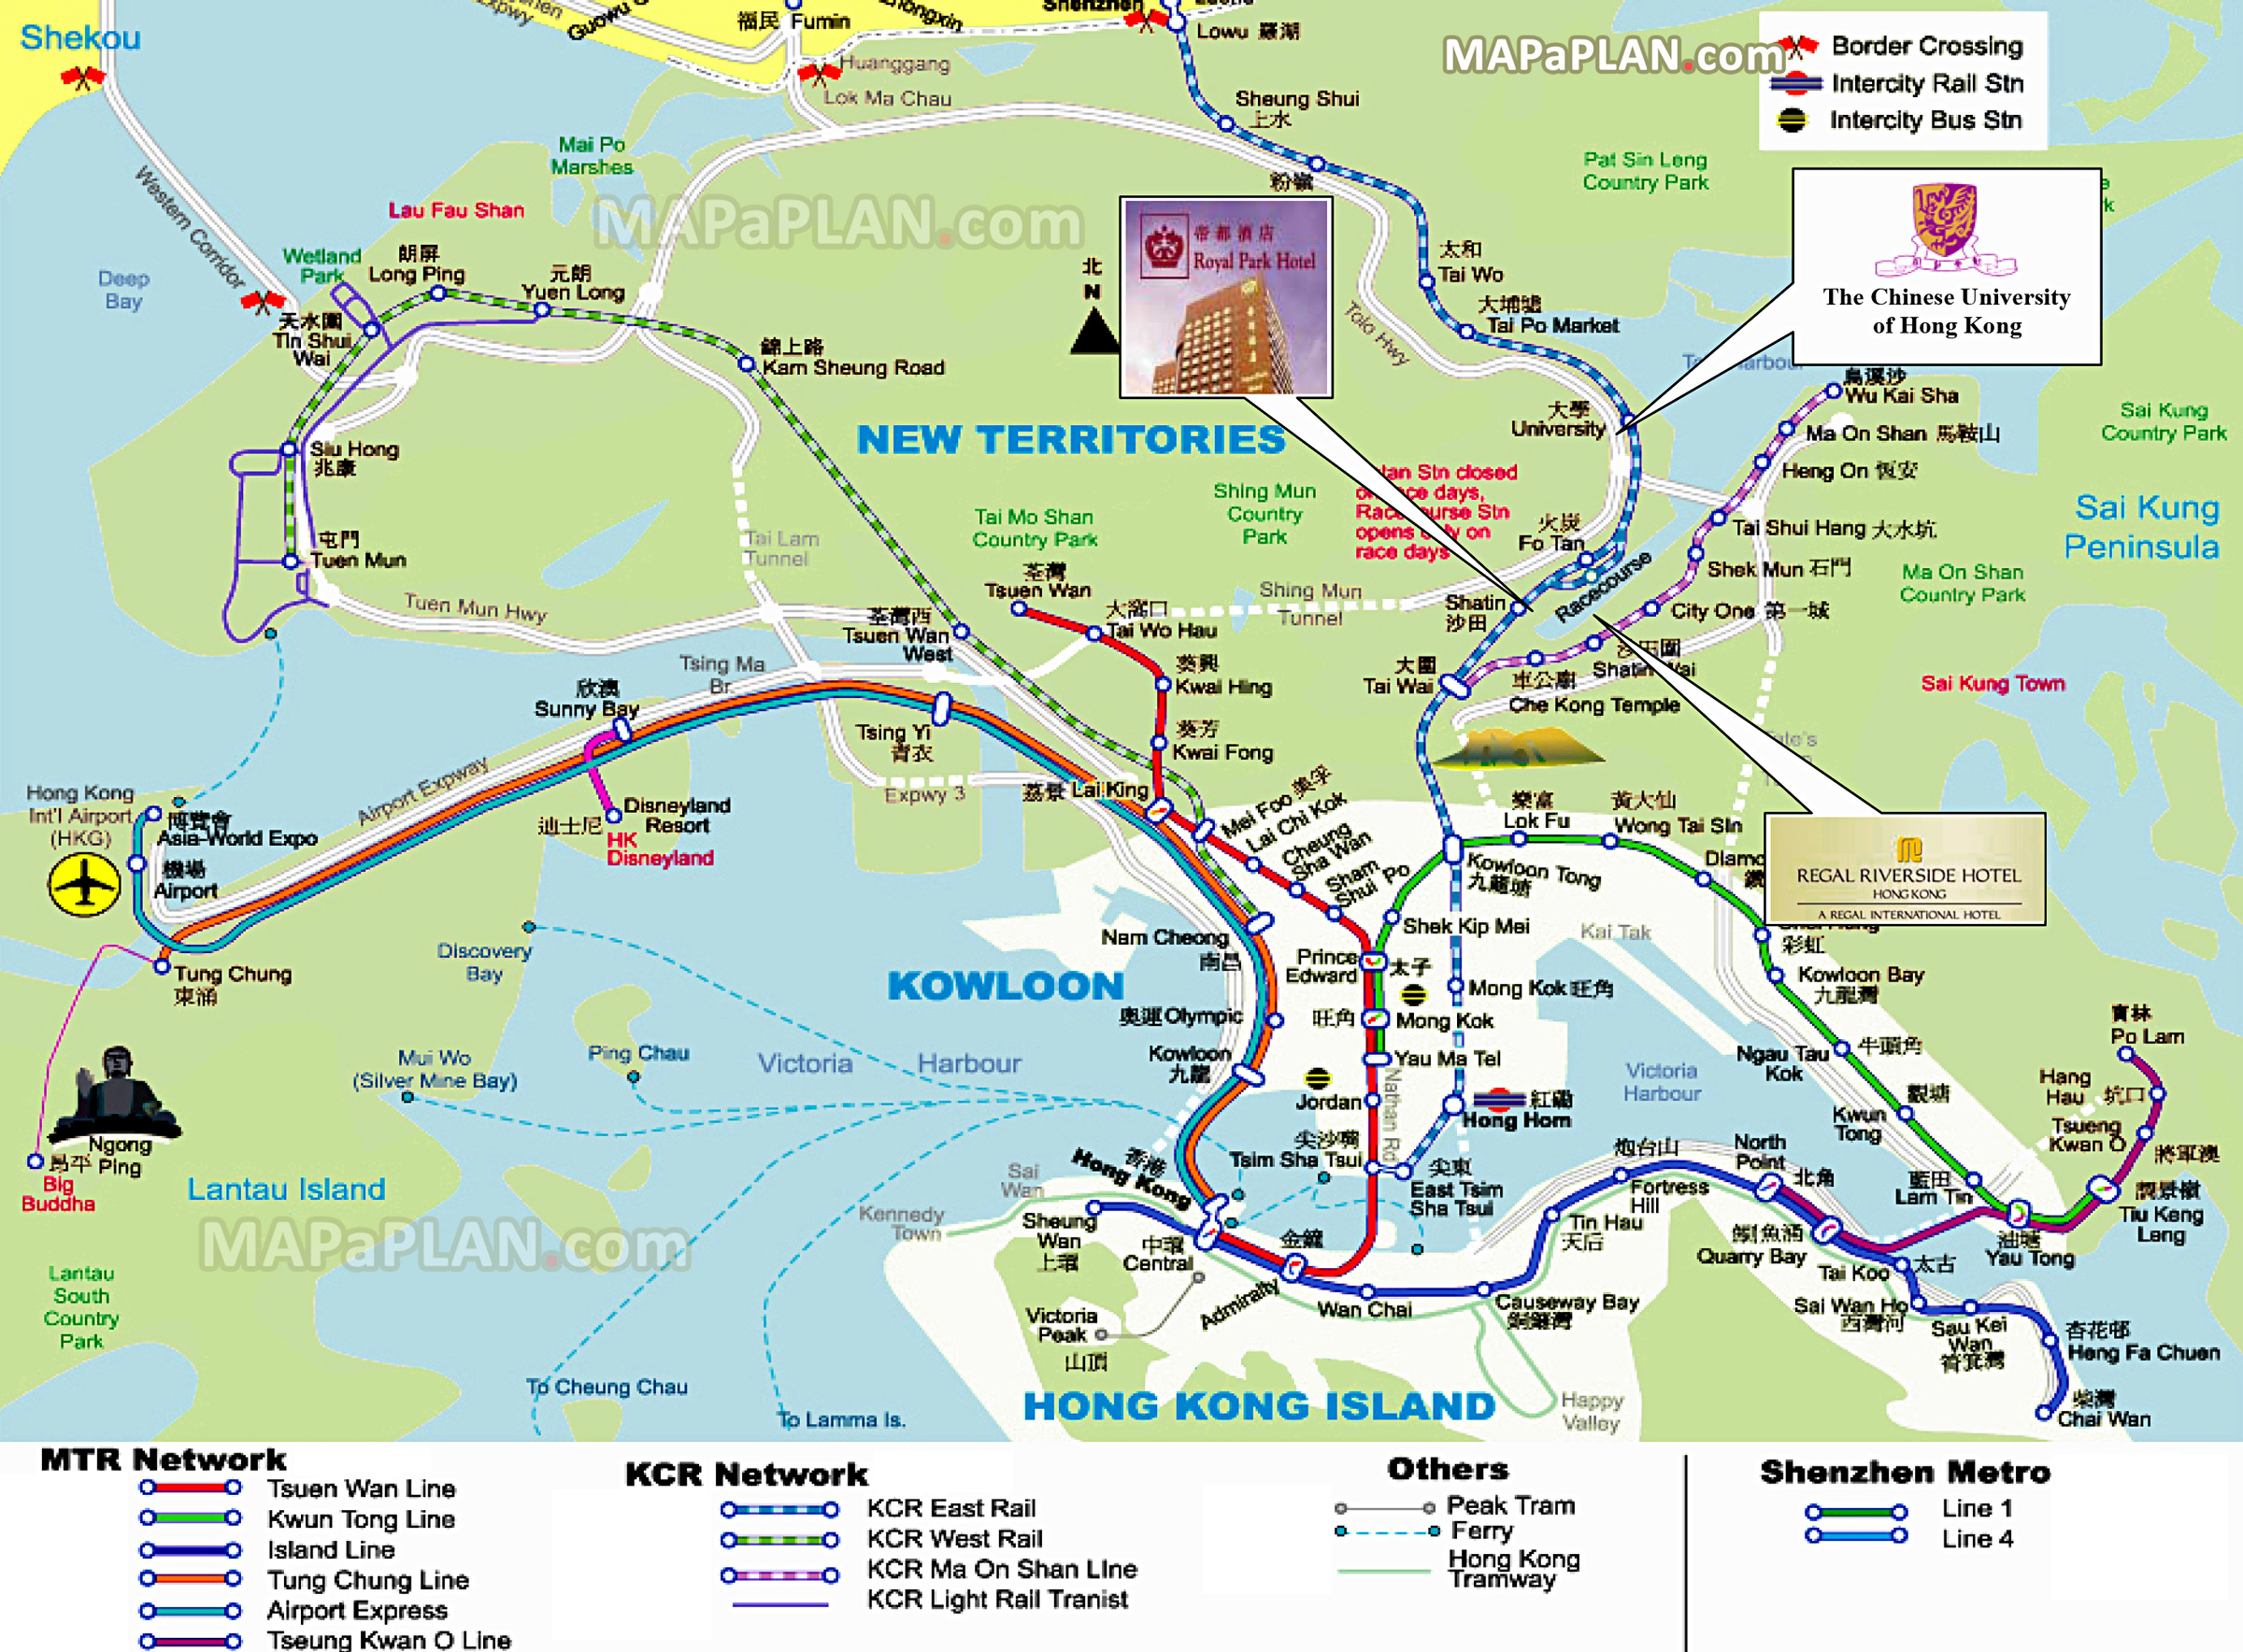 Hong Kong map - What to see, Where to go, What to do - Driving road